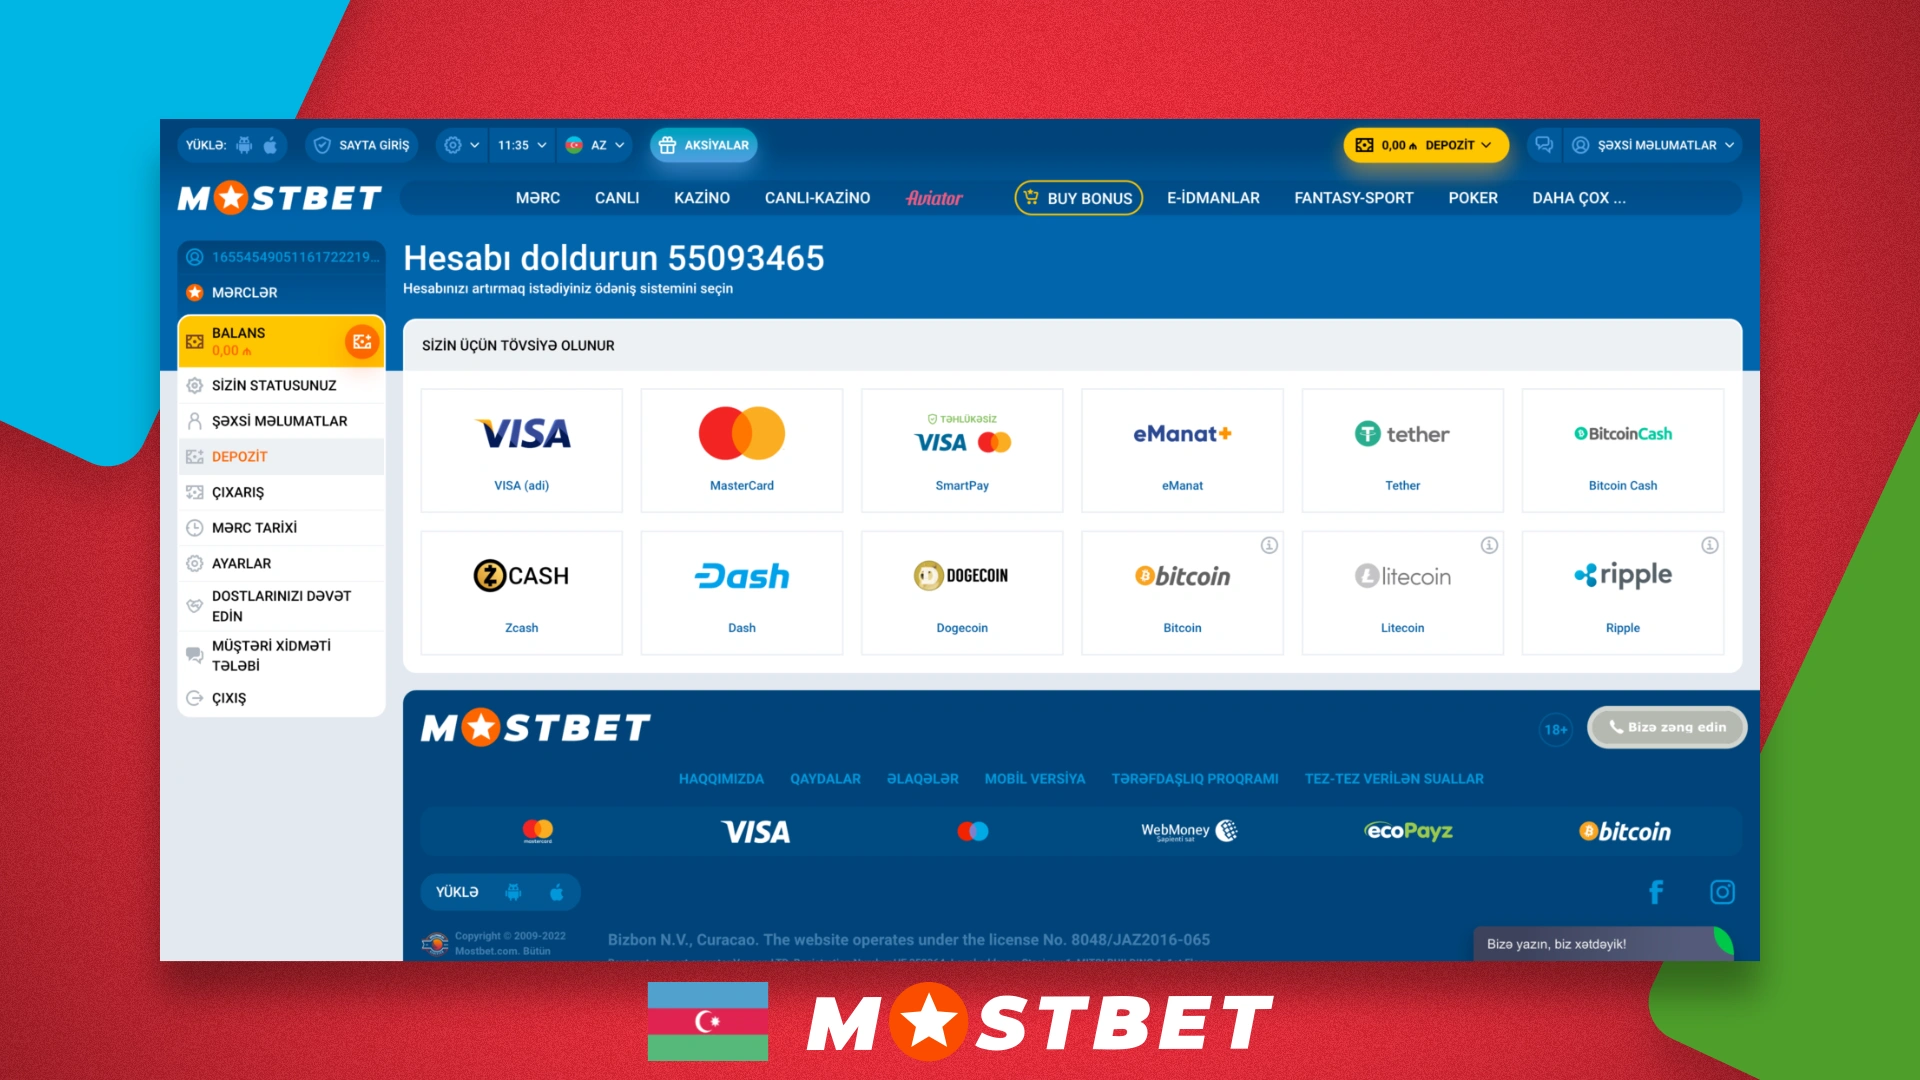 List of available payment methods on Mostbet from Azerbaijan